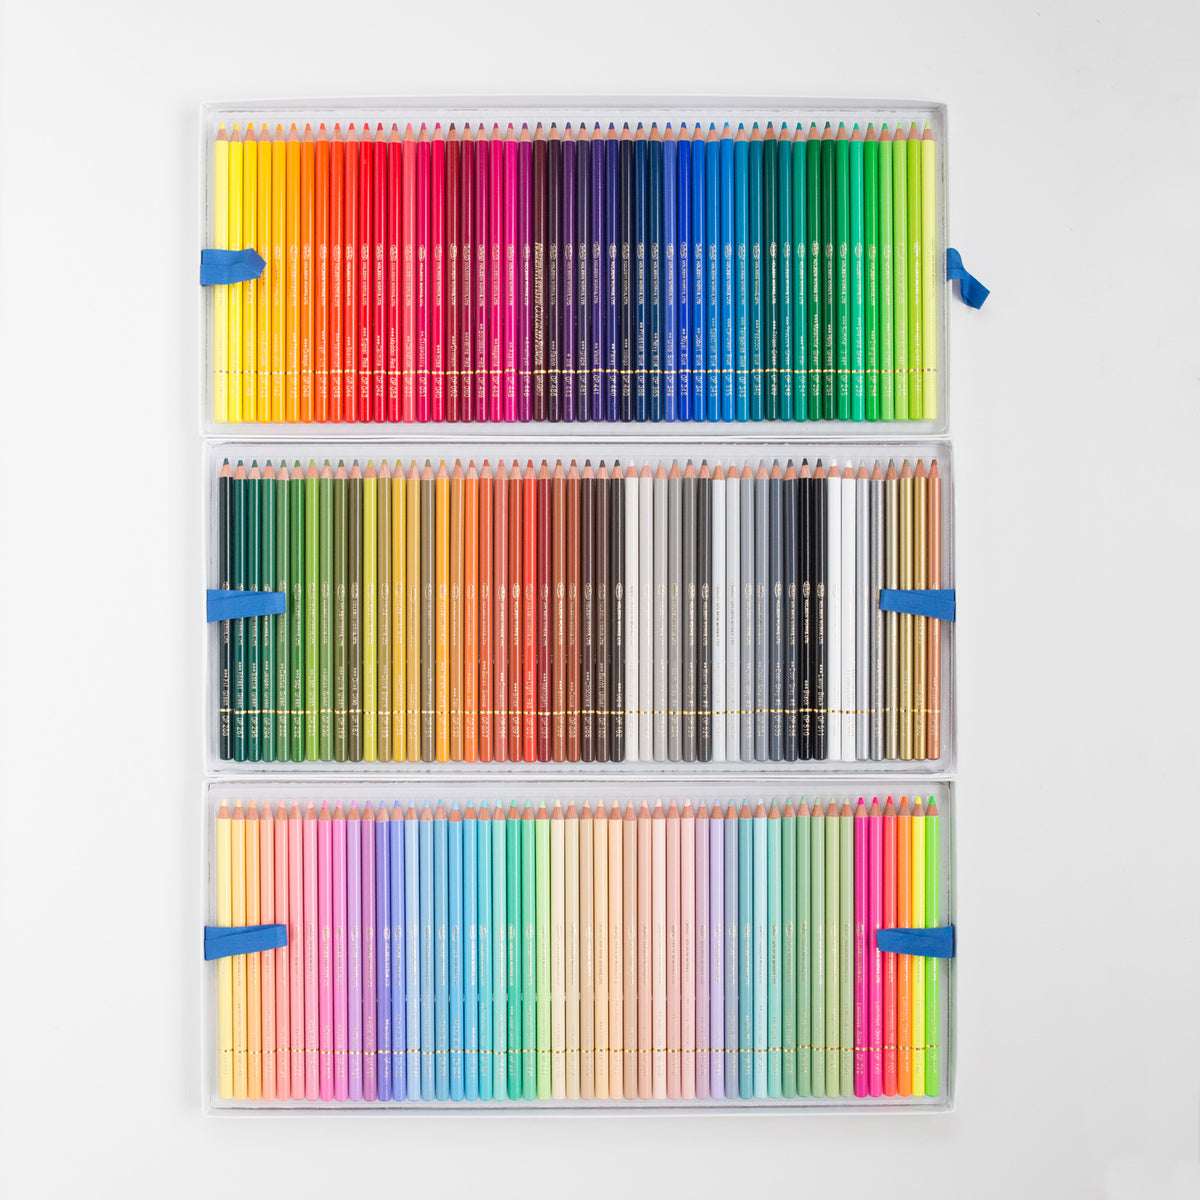 Holbein Coloring Pencil set 150